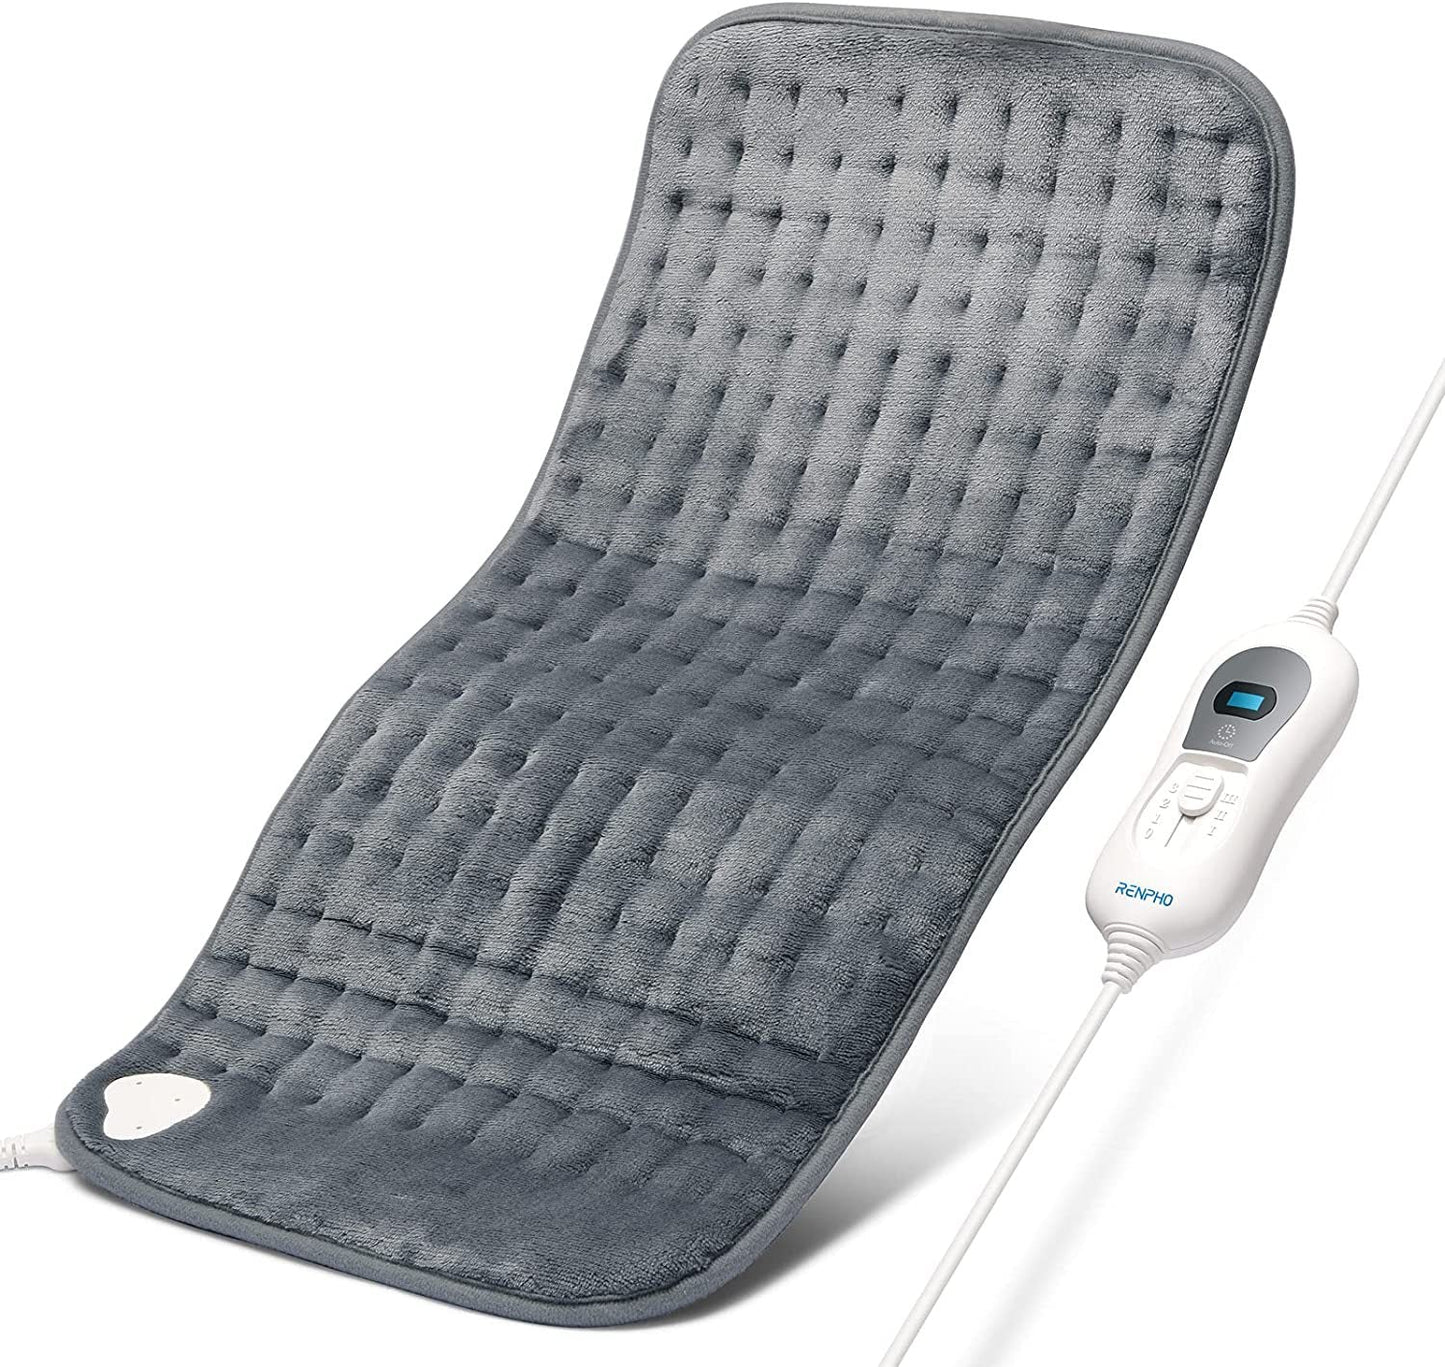 Electric Blanket For Human Body Physiotherapy